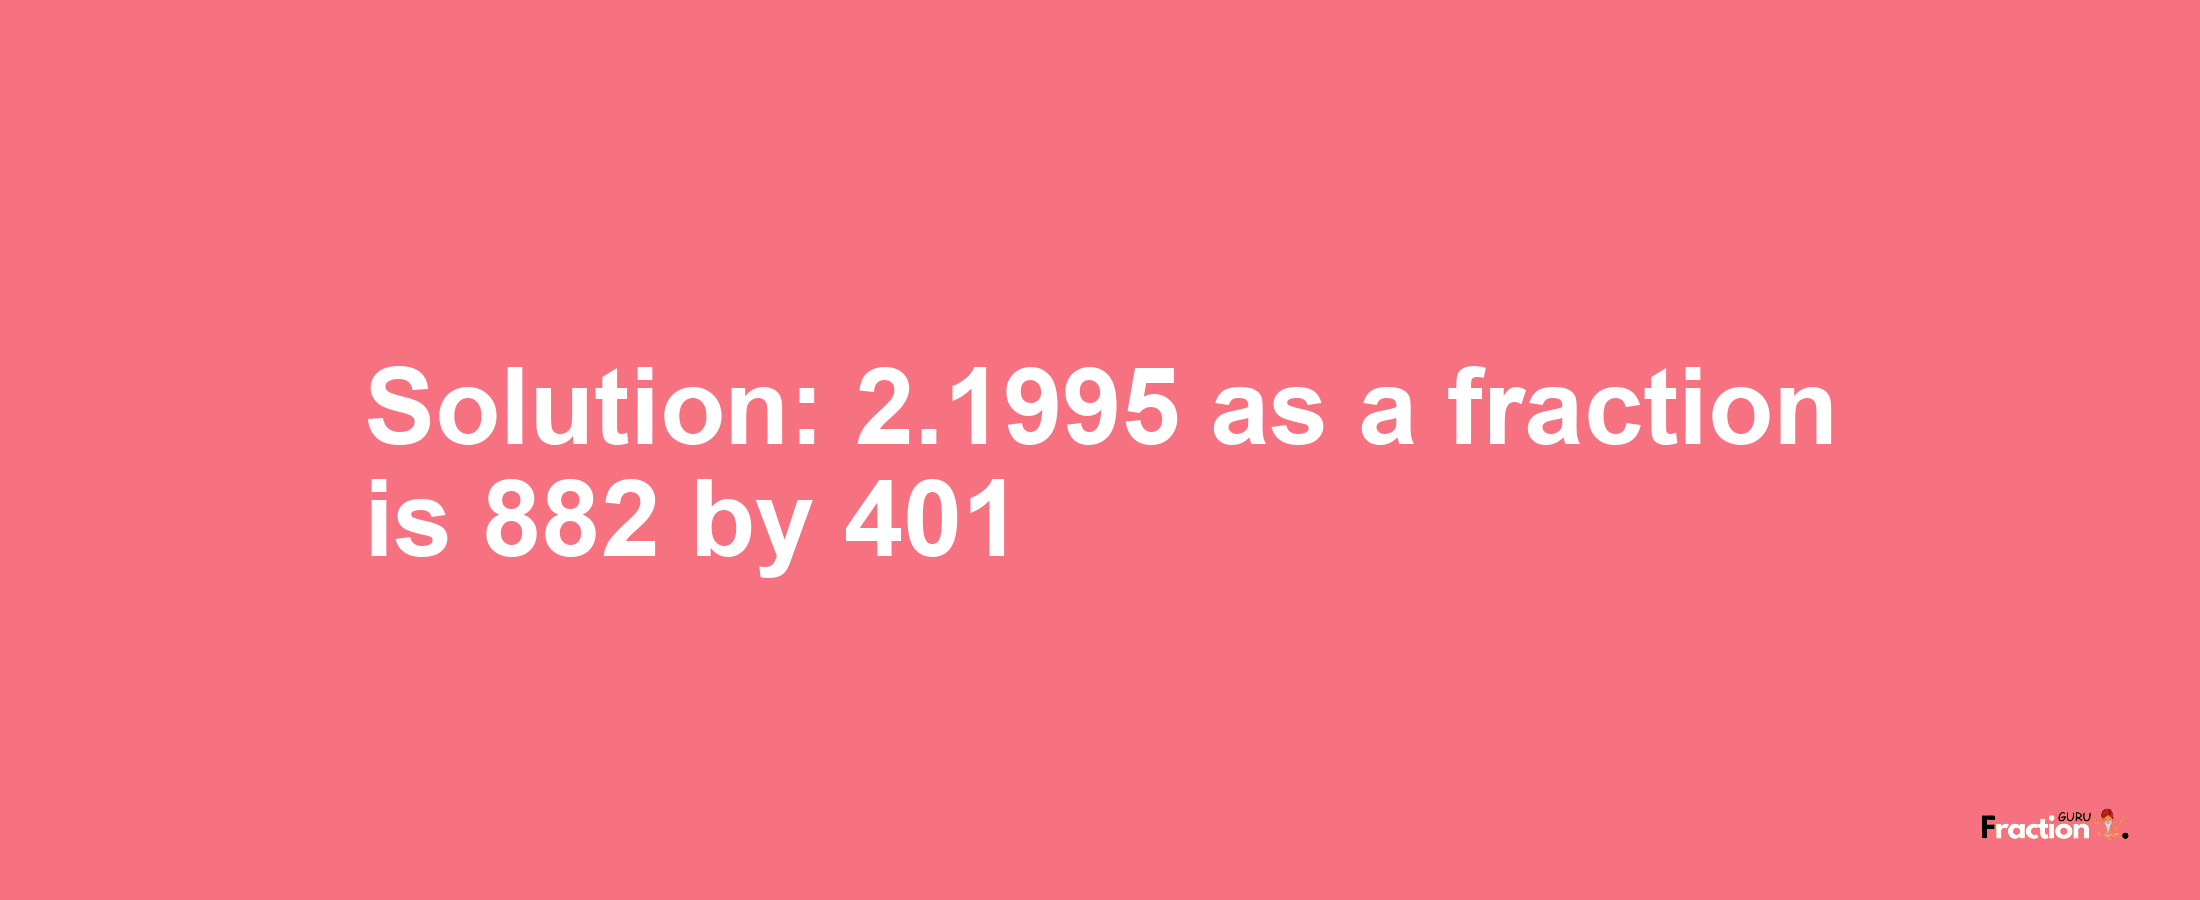 Solution:2.1995 as a fraction is 882/401